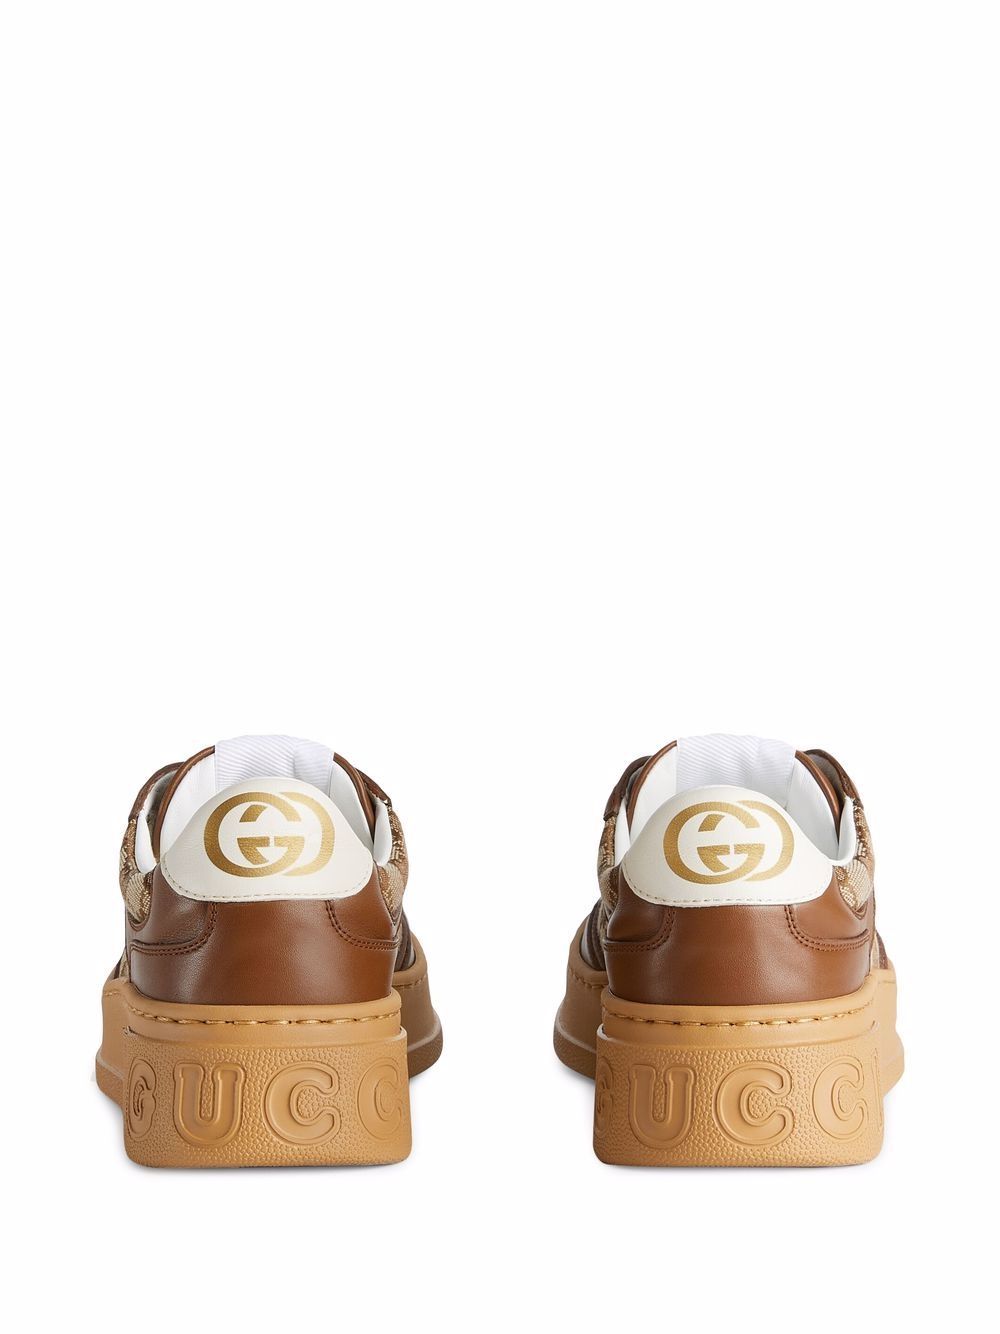 GUCCI Nude & Neutral Chunky Sneakers for Women